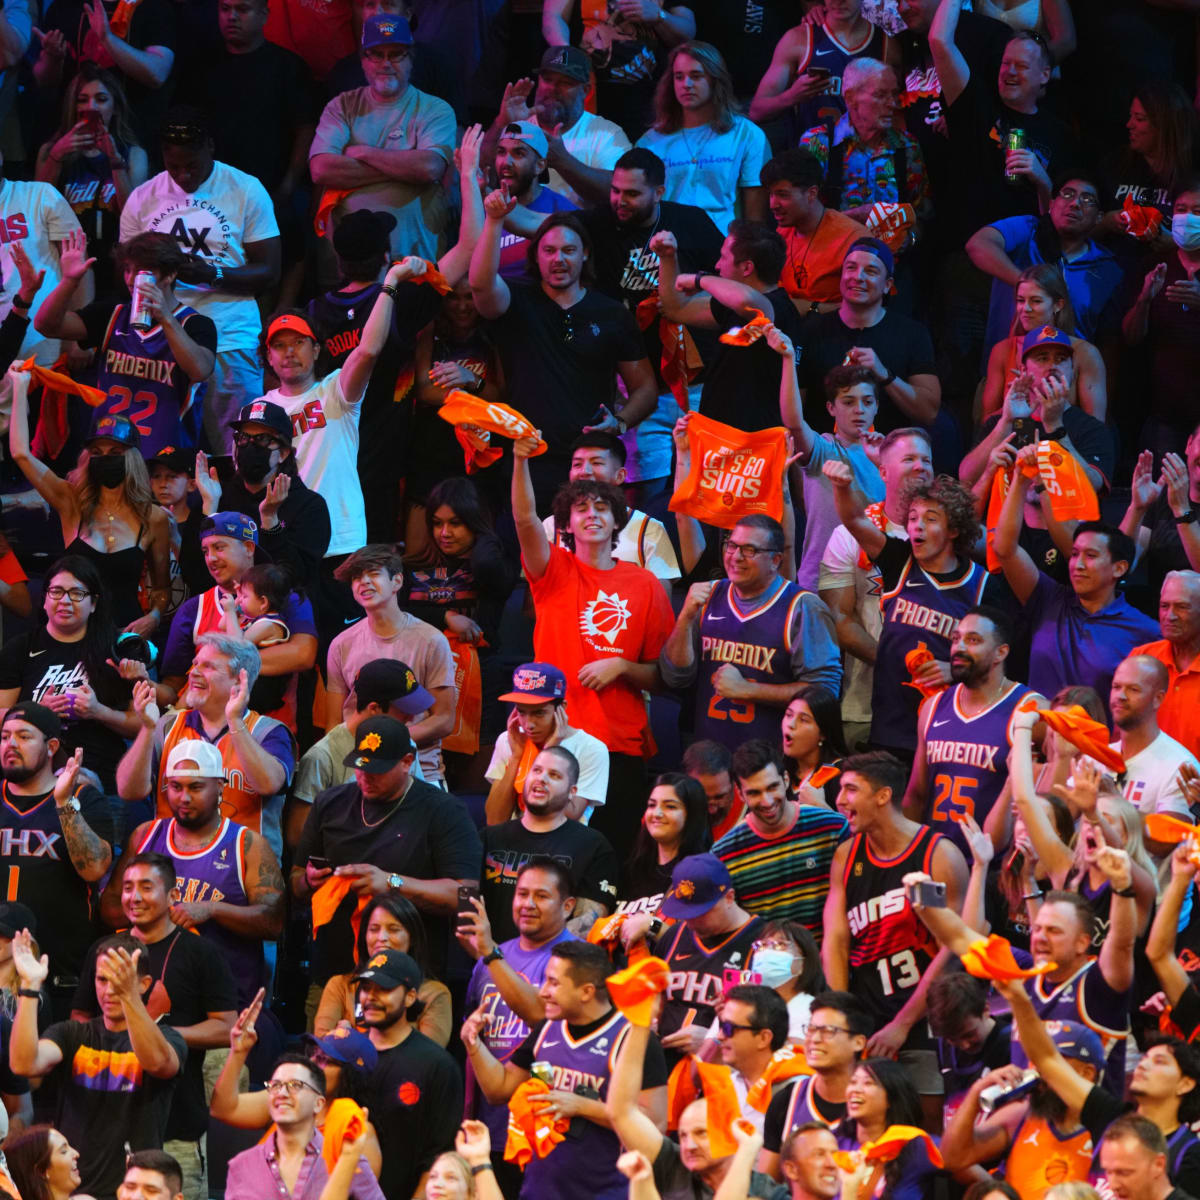 Suns have fun with vulgar shirts worn by Pelicans crowd